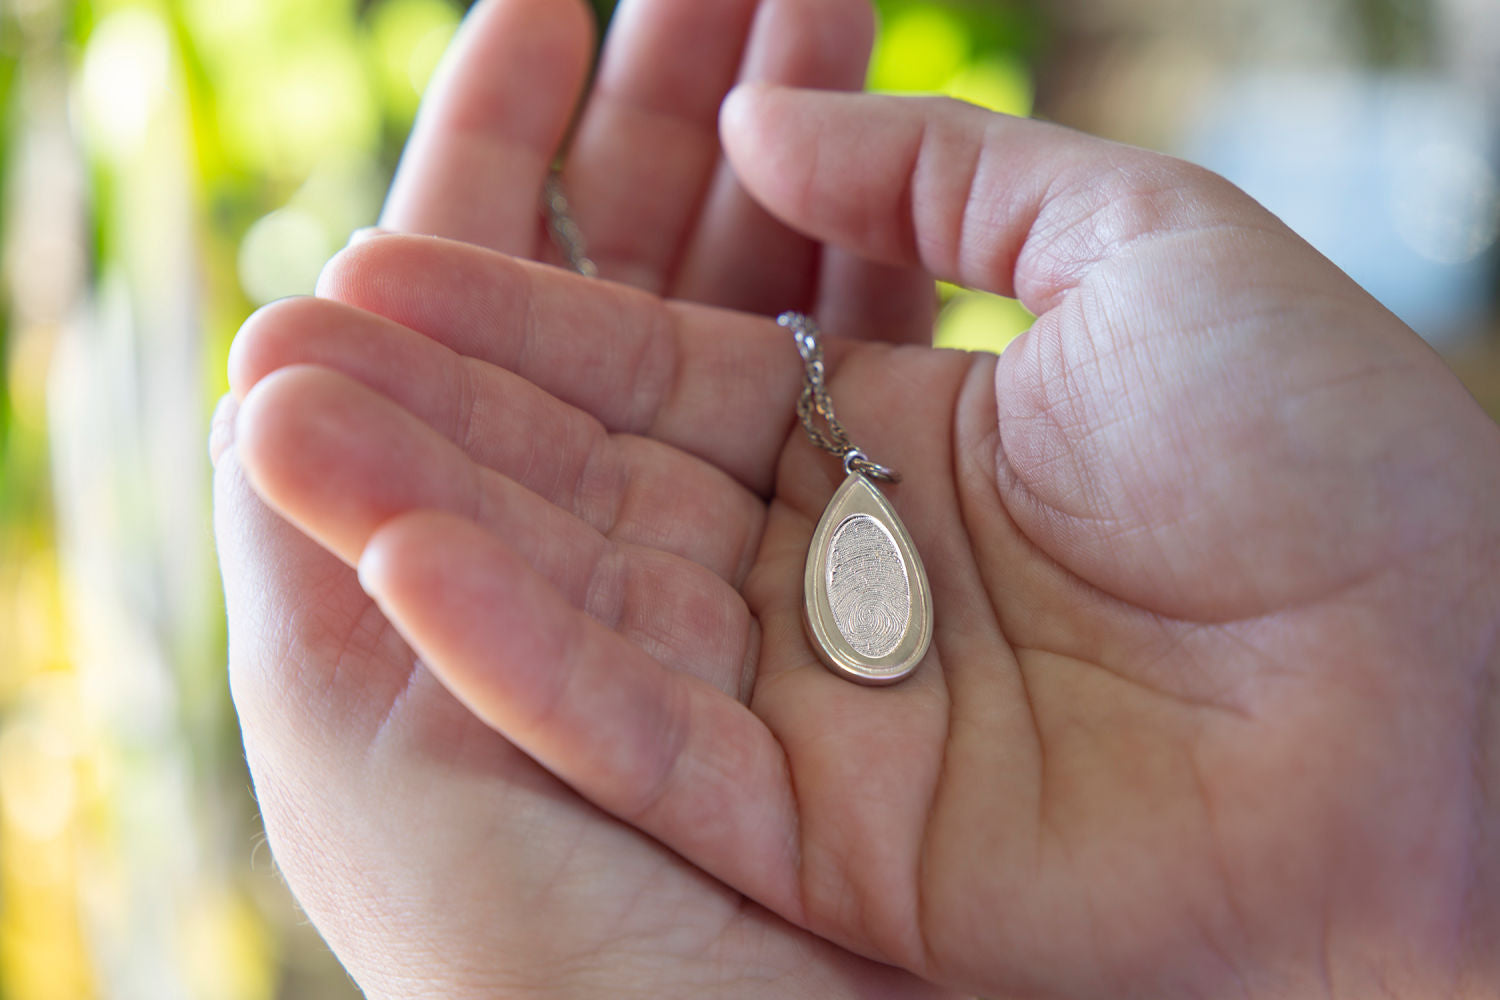 How to Choose a Pendant for Cremation Fingerprint Jewelry